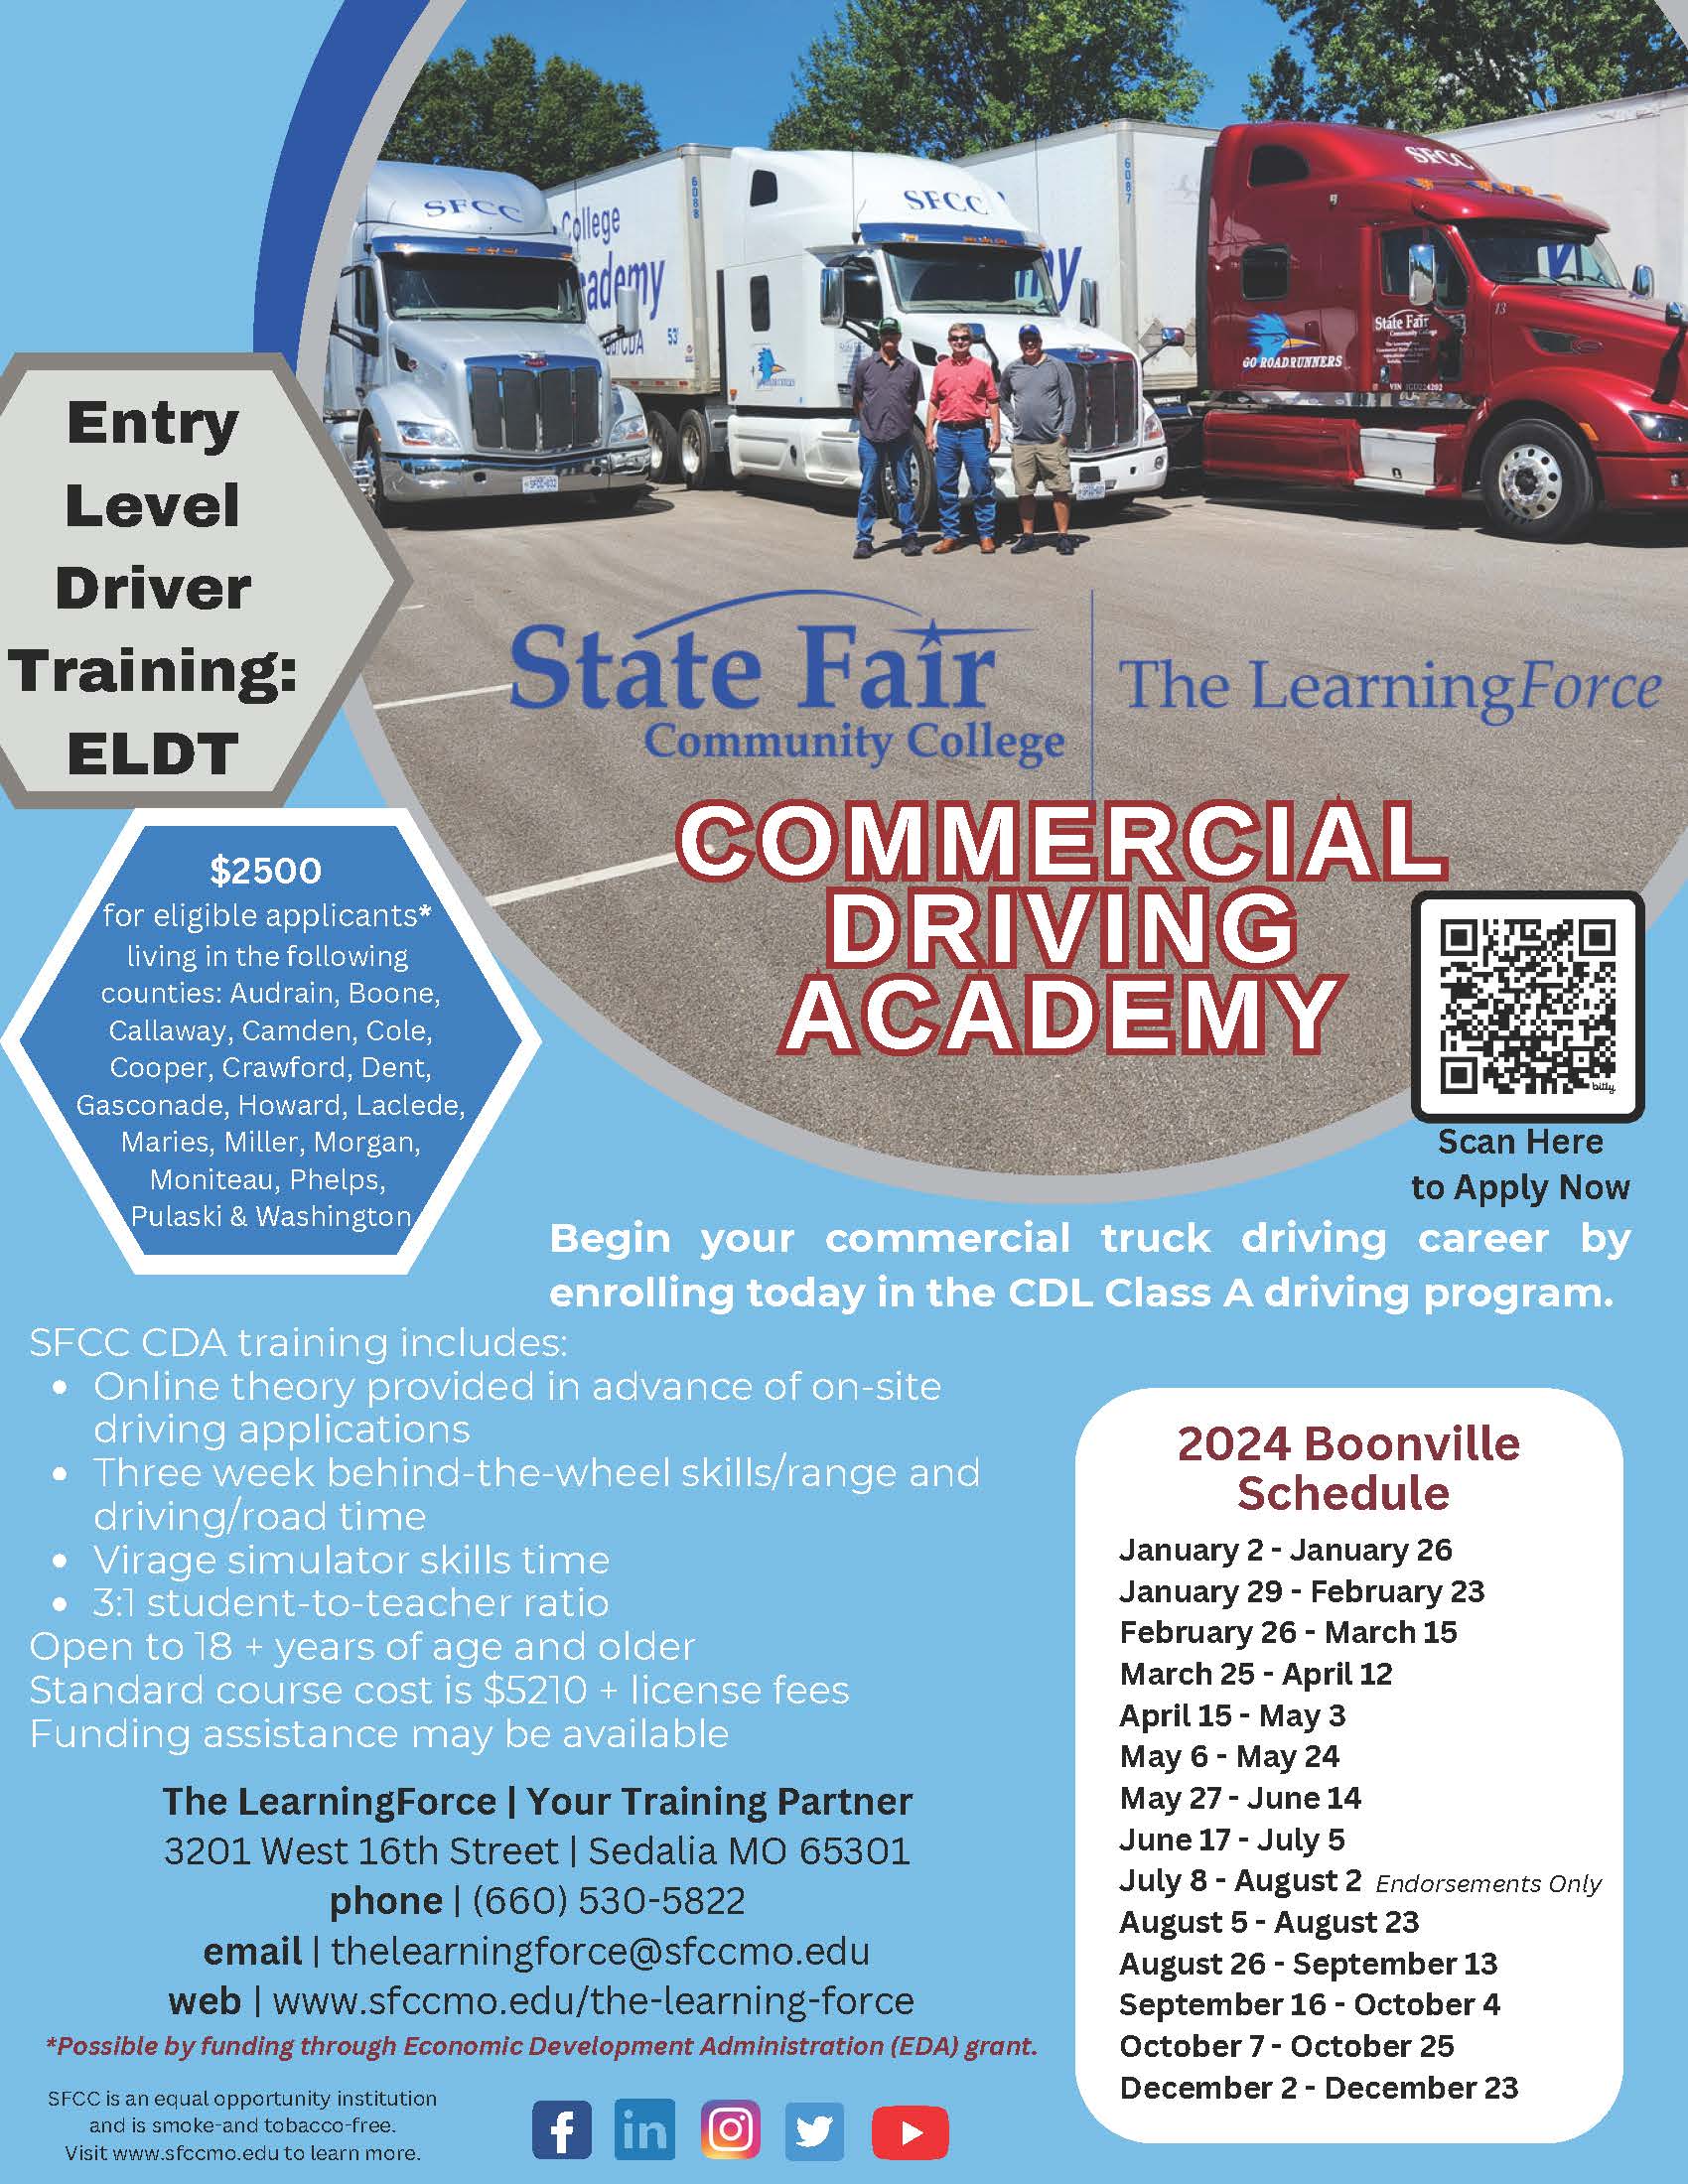 Read more about SFCC now enrolling Commercial Driving Academy Class A in Boonville